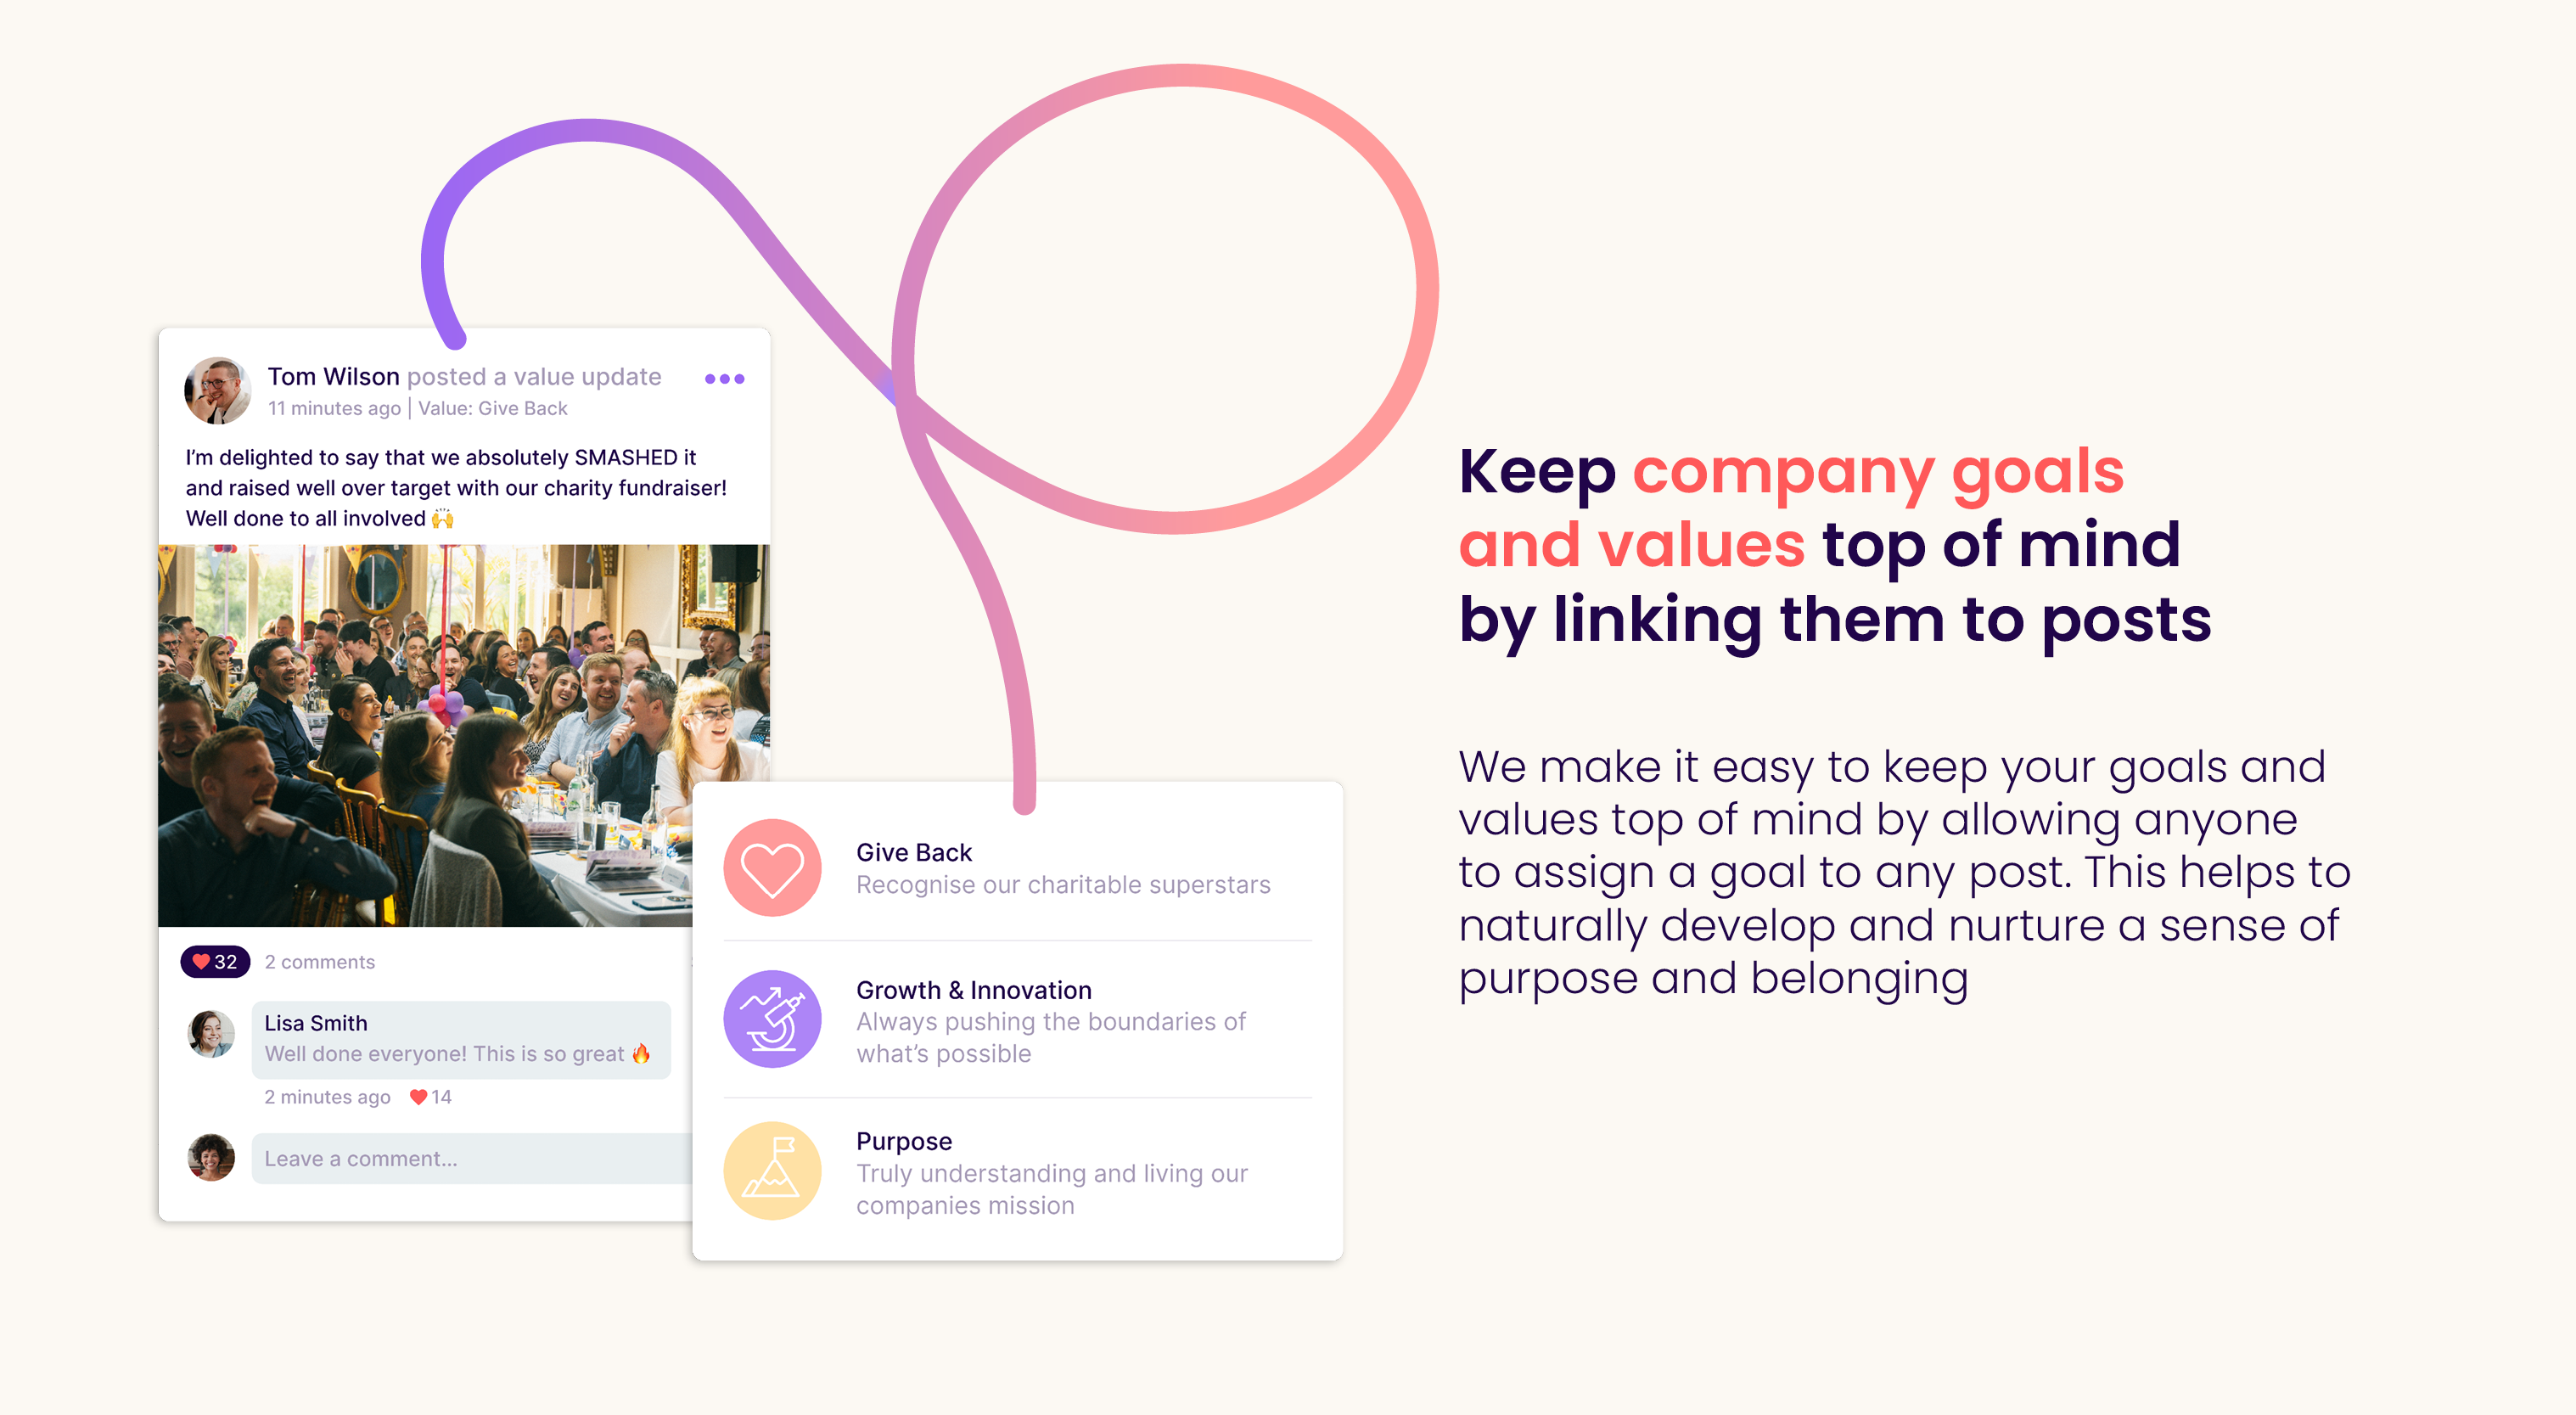 Keep company goals and values top of mind by linking them to posts